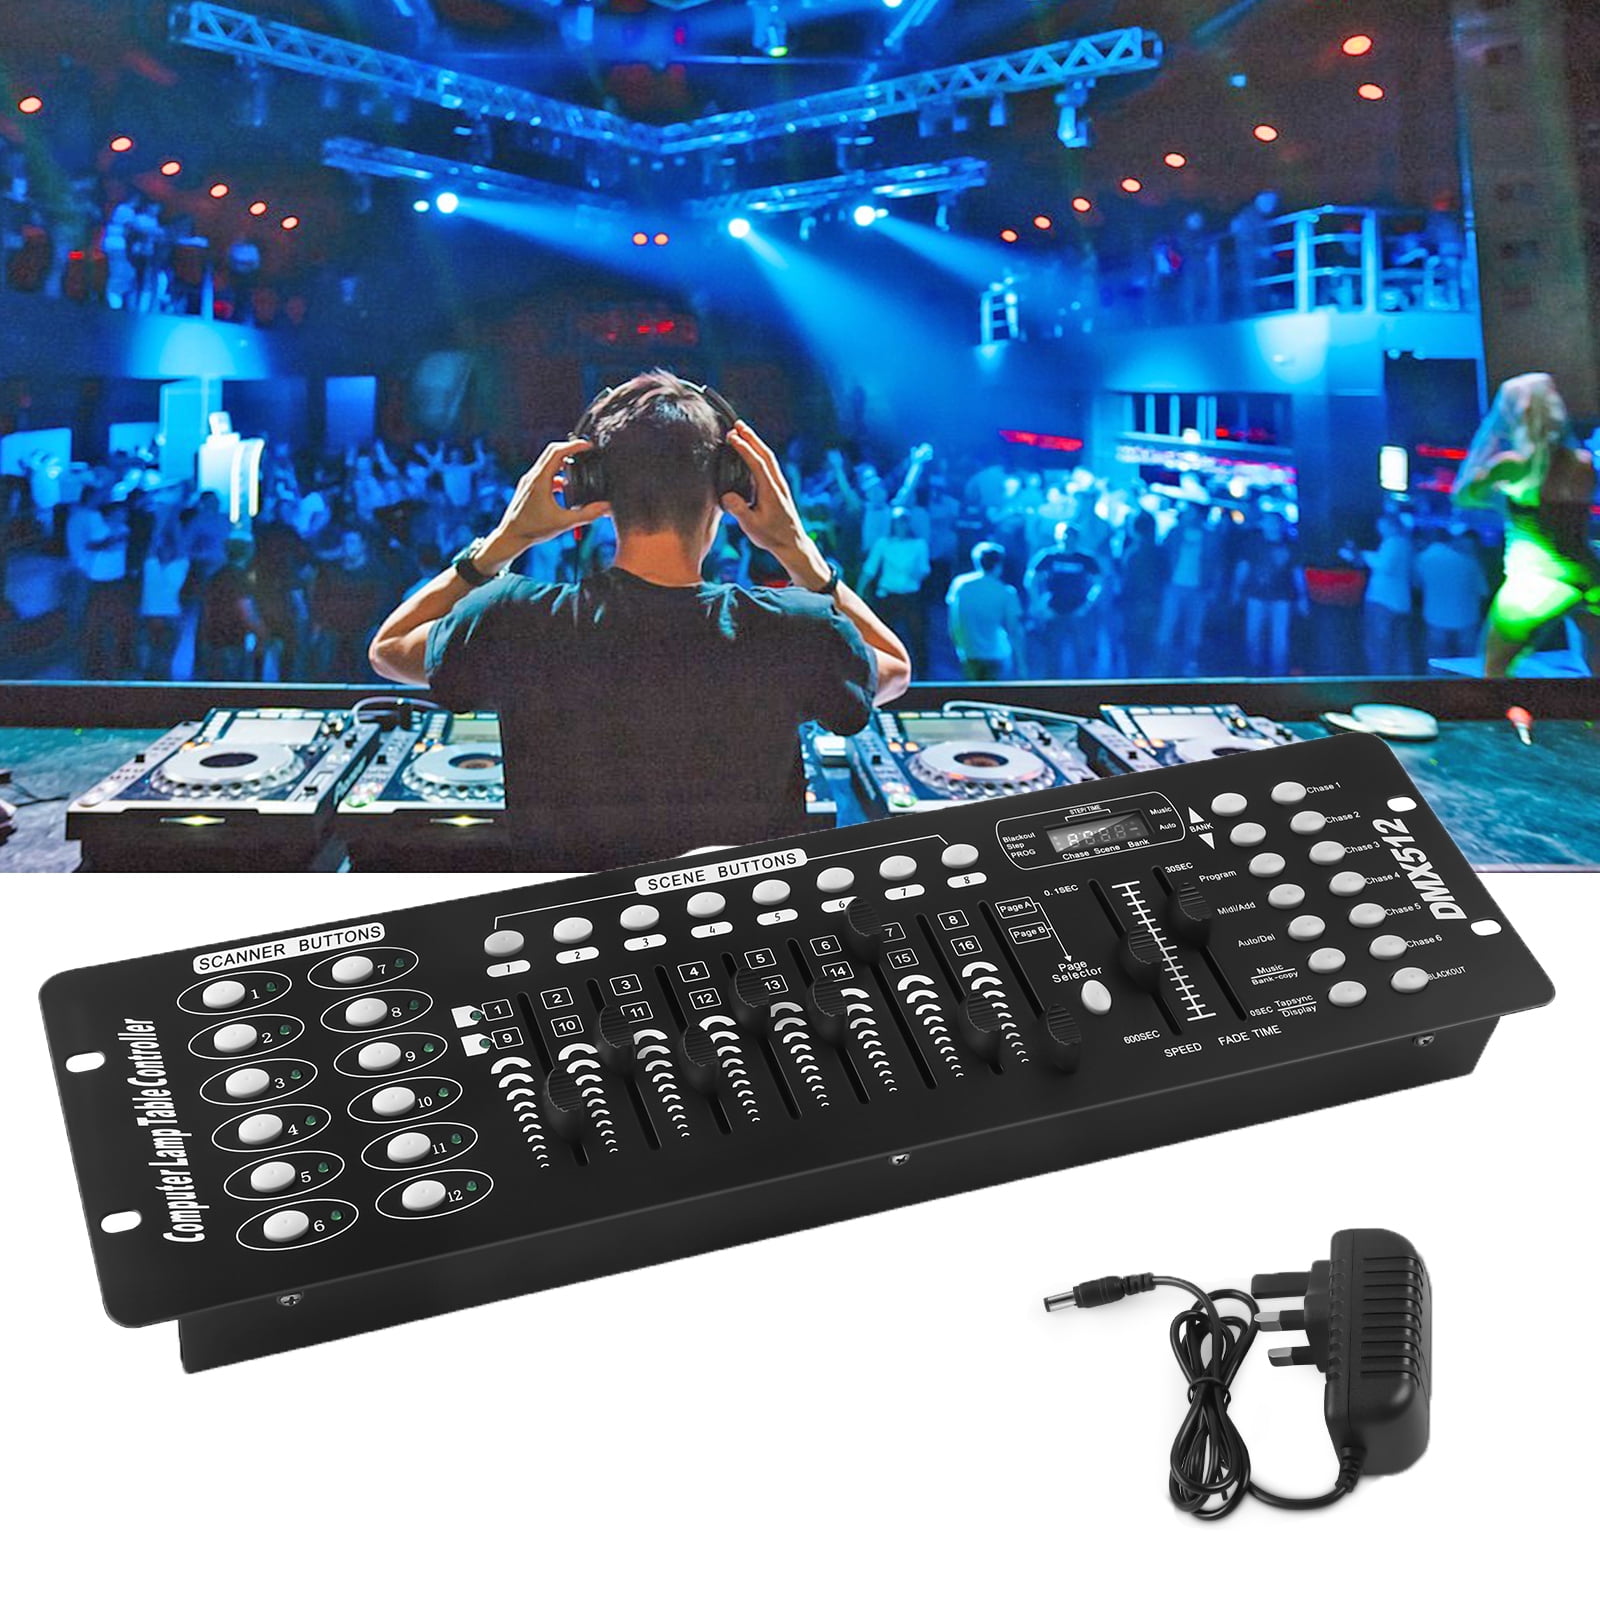 Lixada 192 Channels DMX512 Controller Console for Stage Light